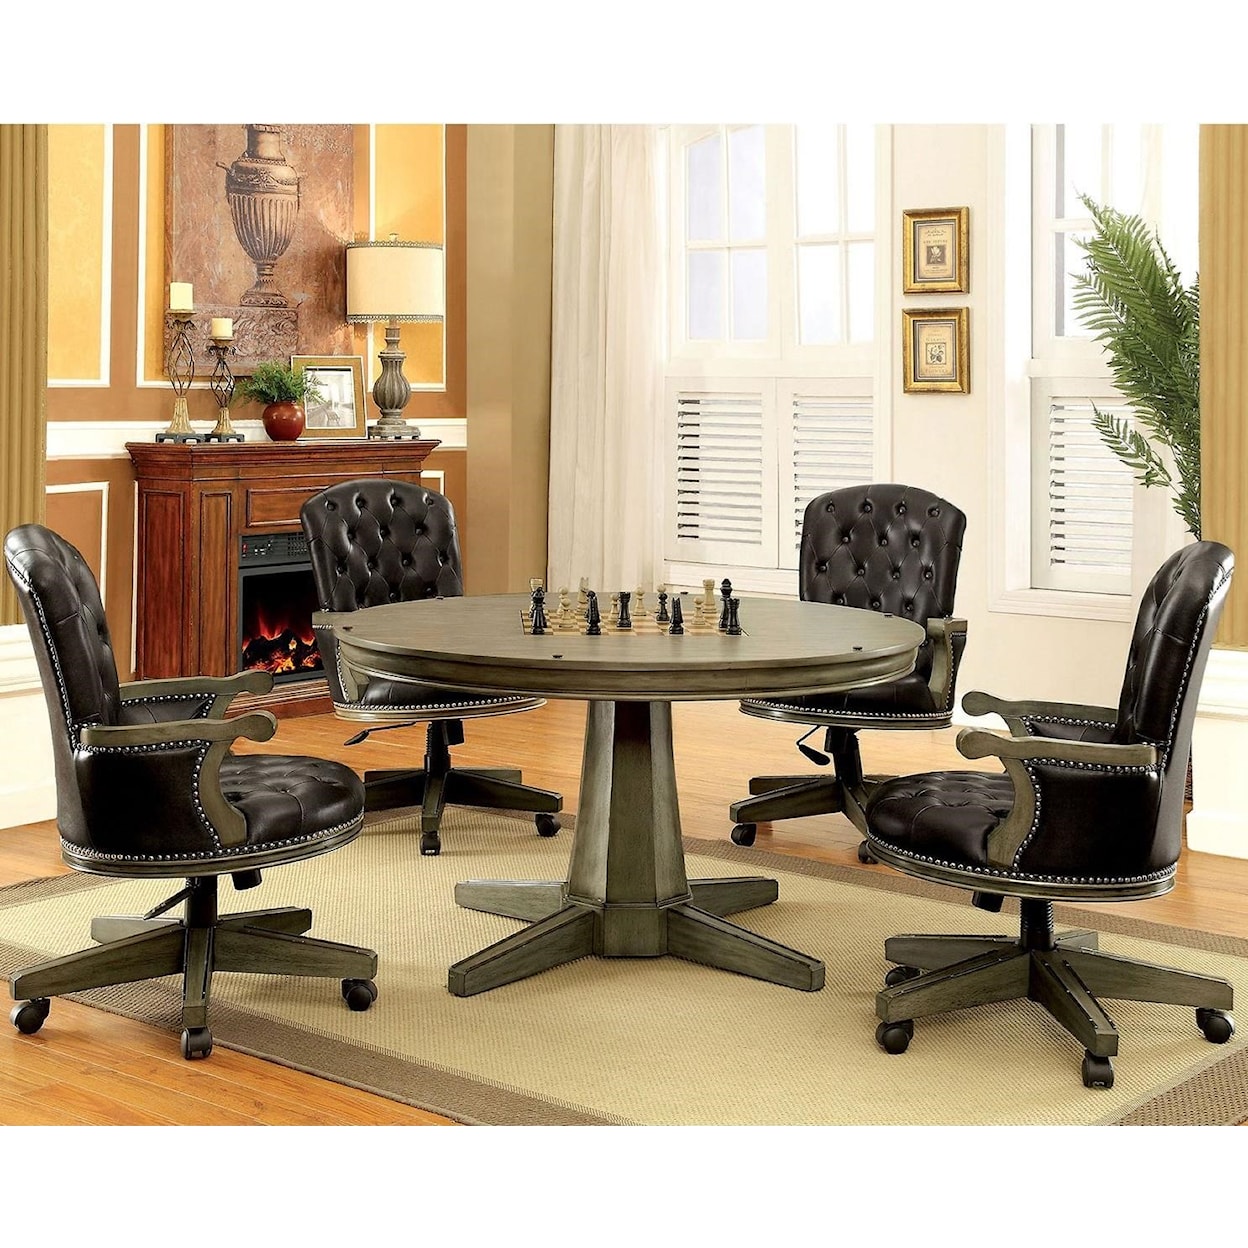 Furniture of America Yelena Table and 4 Chairs